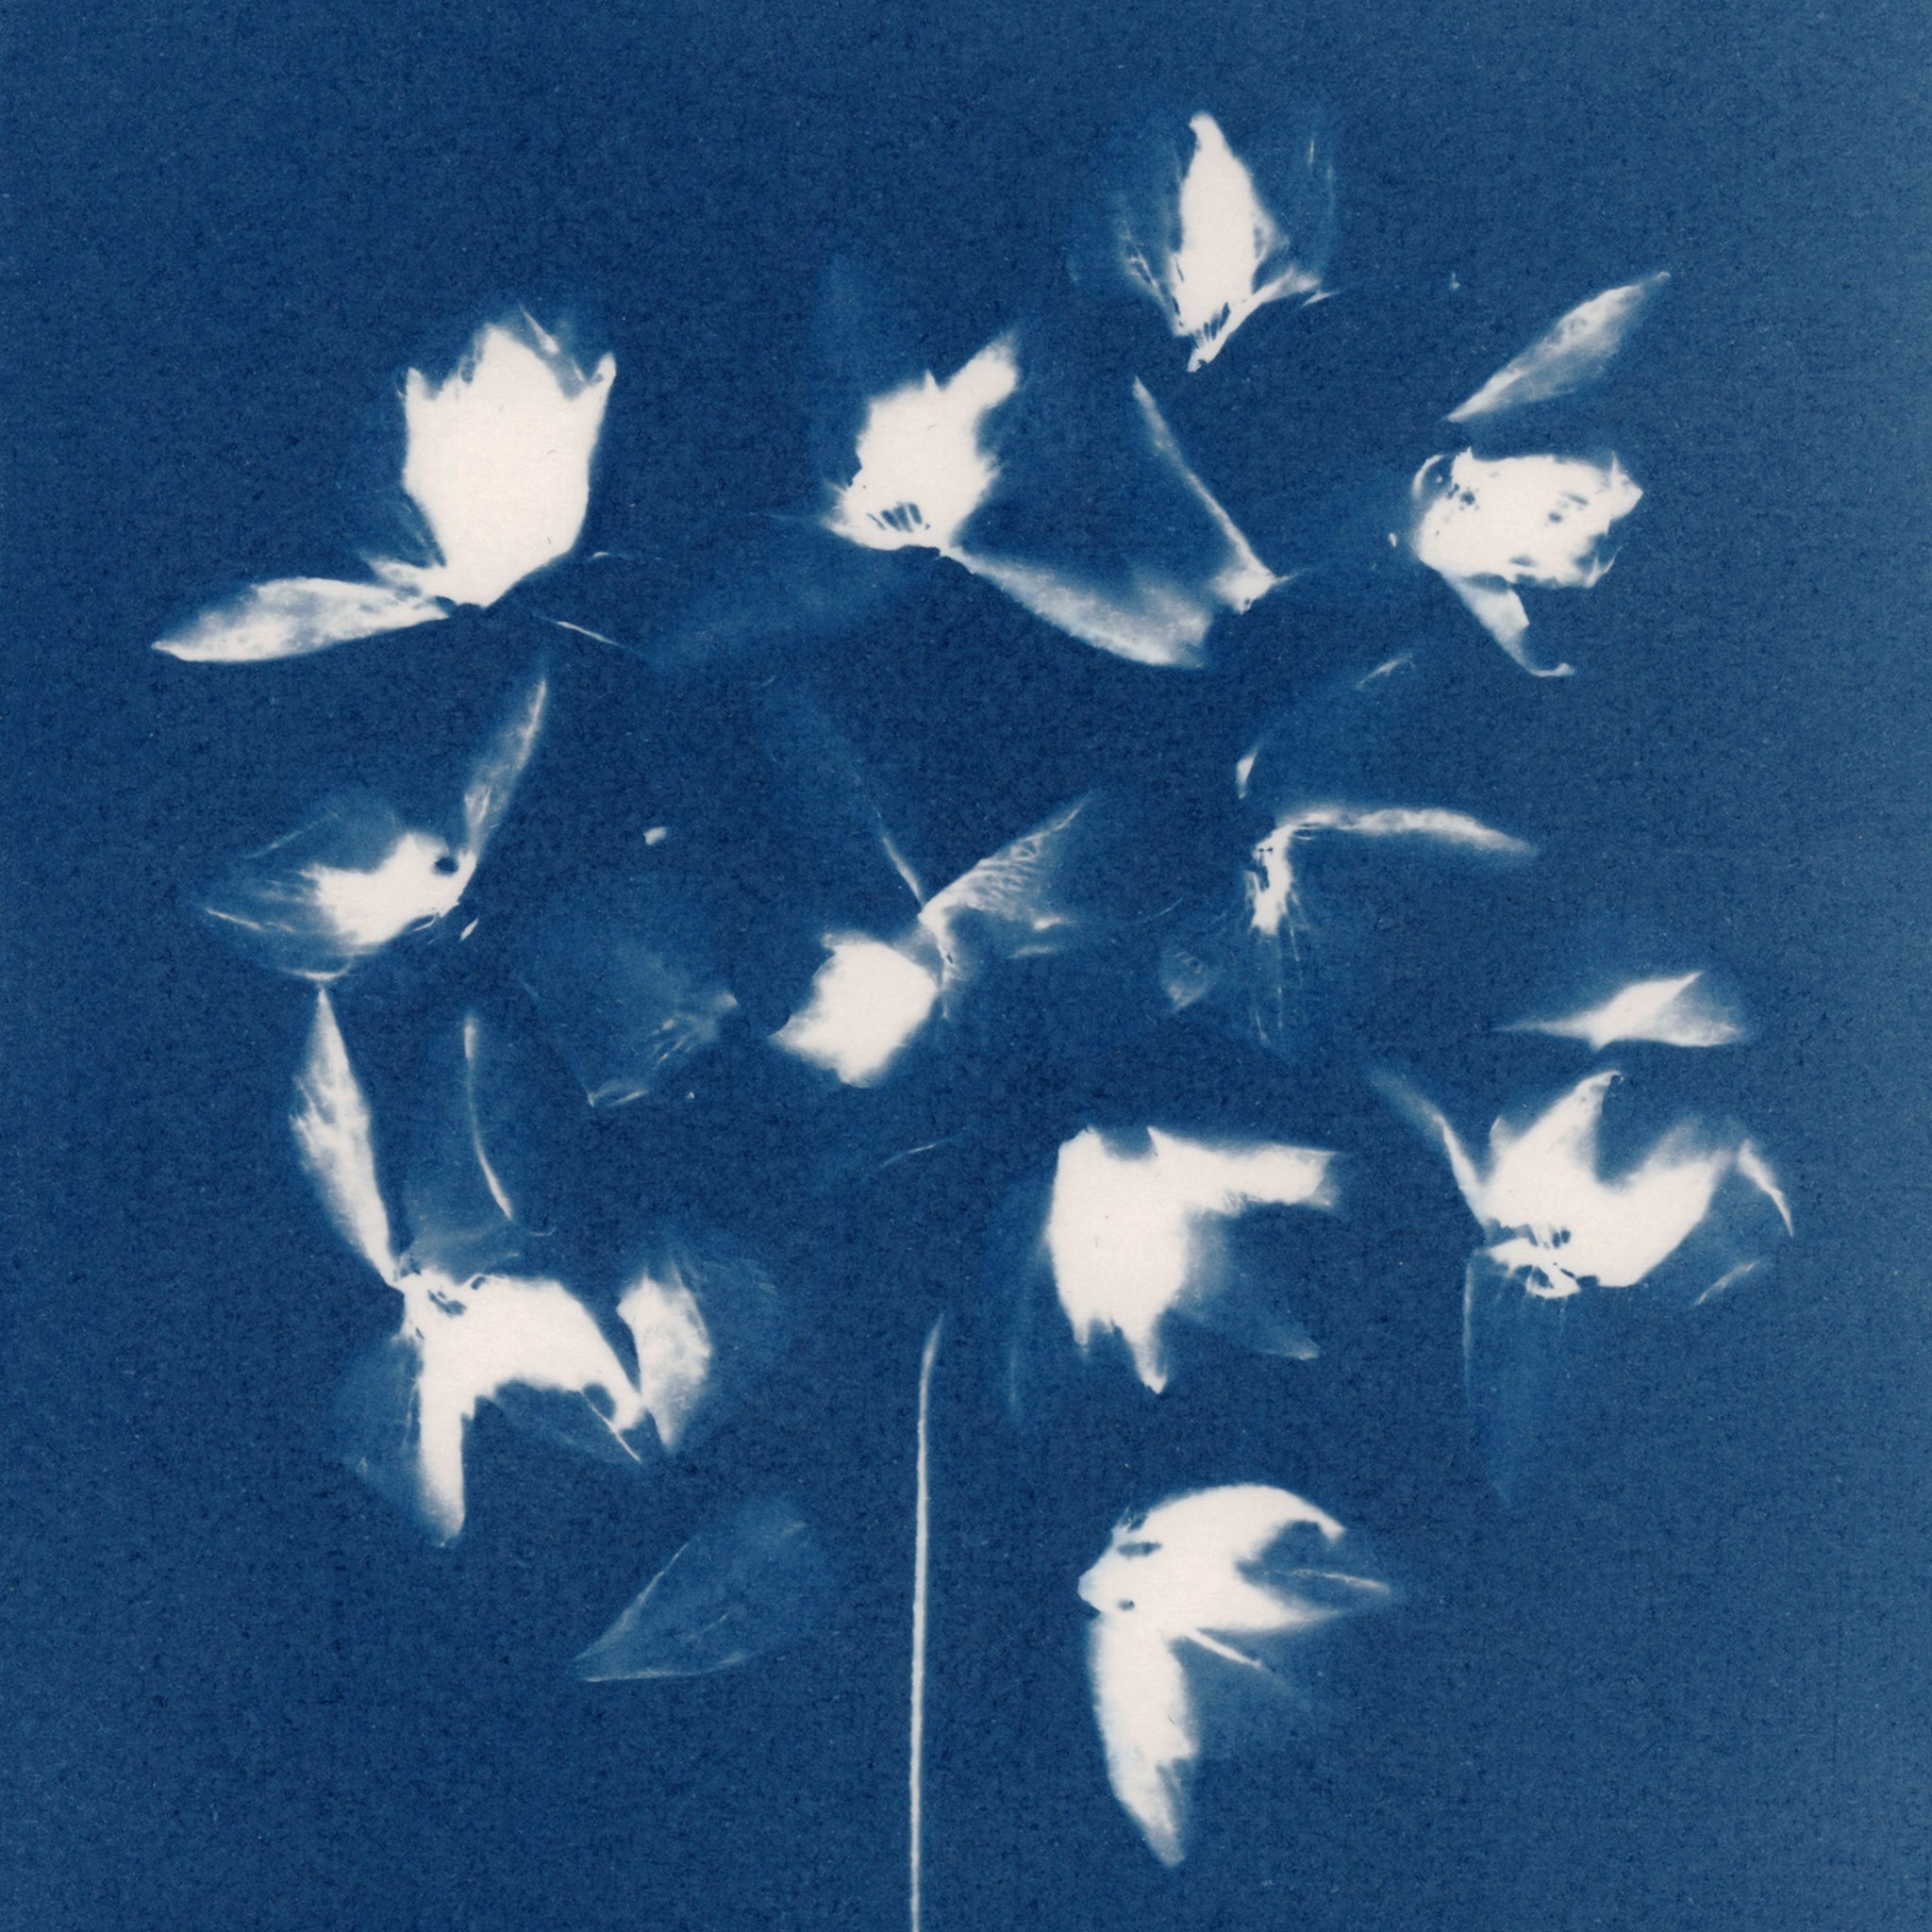 Prussian Blue Cyanotype Original Print featuring dried orchid petals by Jo Thomson of Florigin